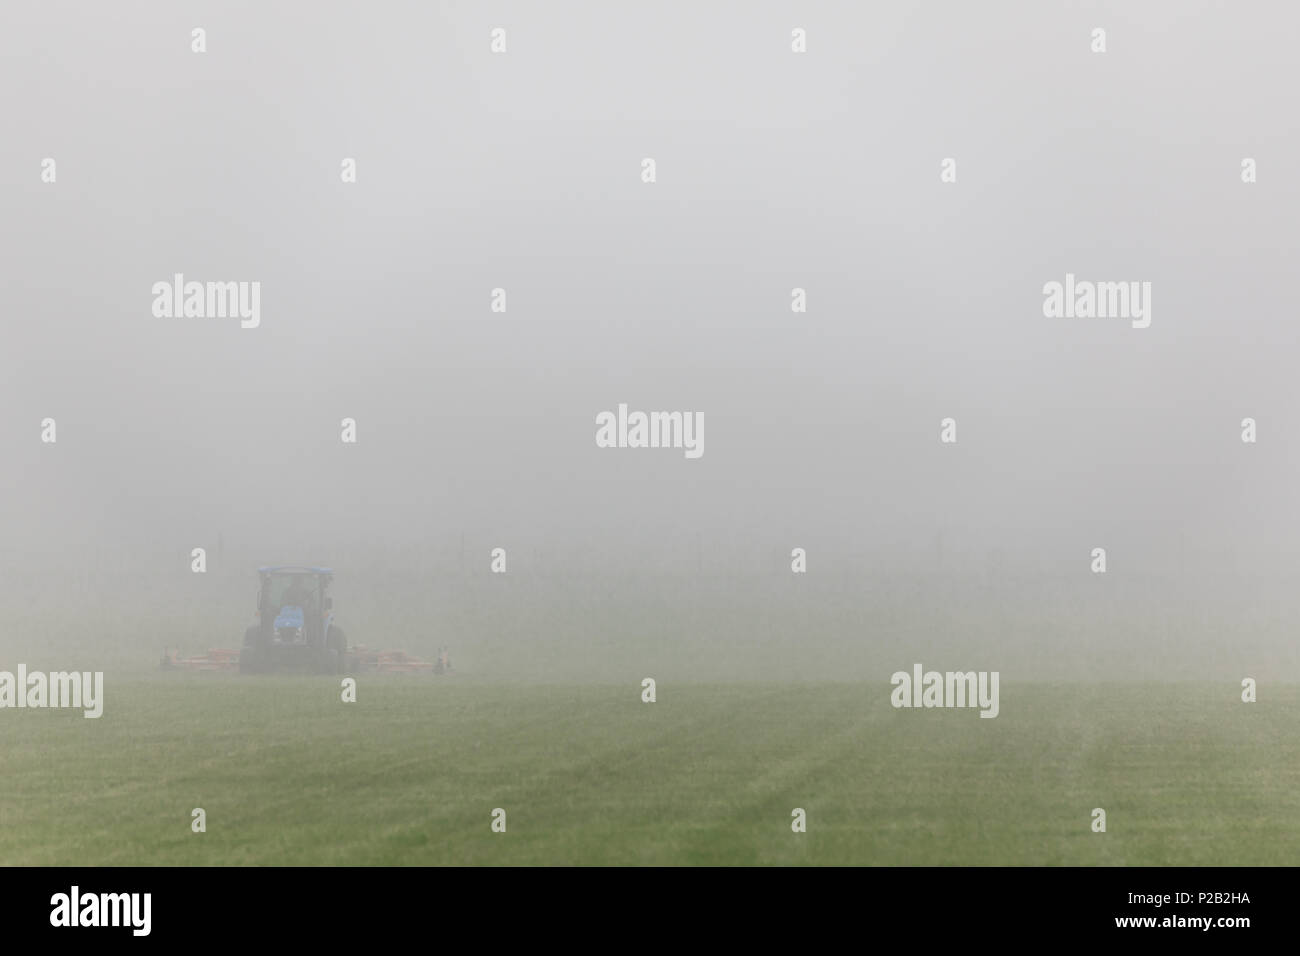 tractor mowing the grass on a very foggy day in in Bridghampton, NY Stock Photo